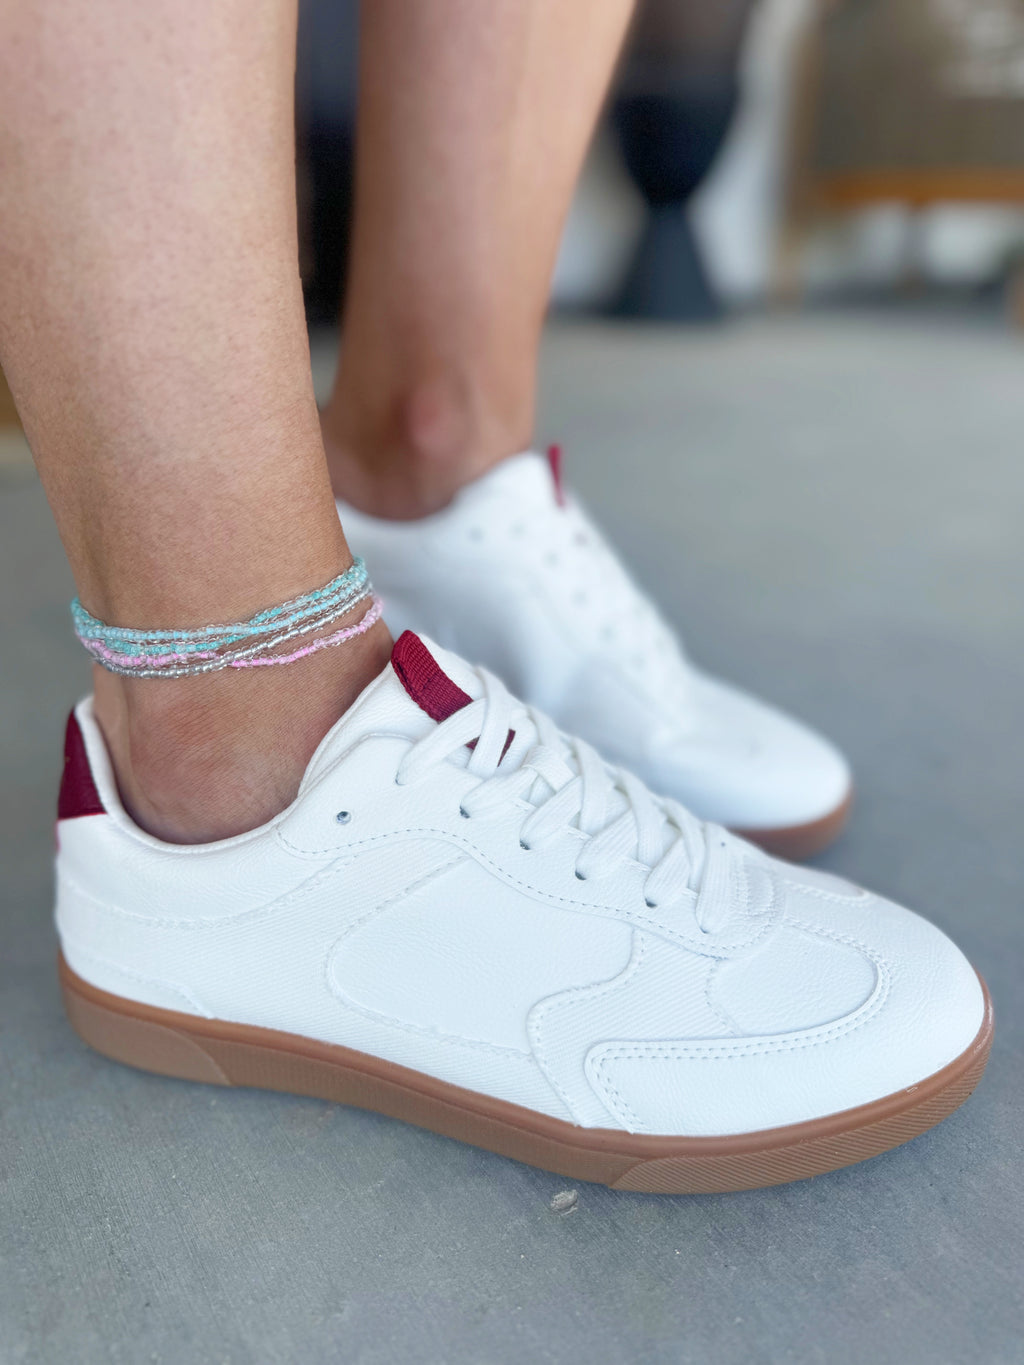 Blowfish Tastic Sneakers in White and Red Twill